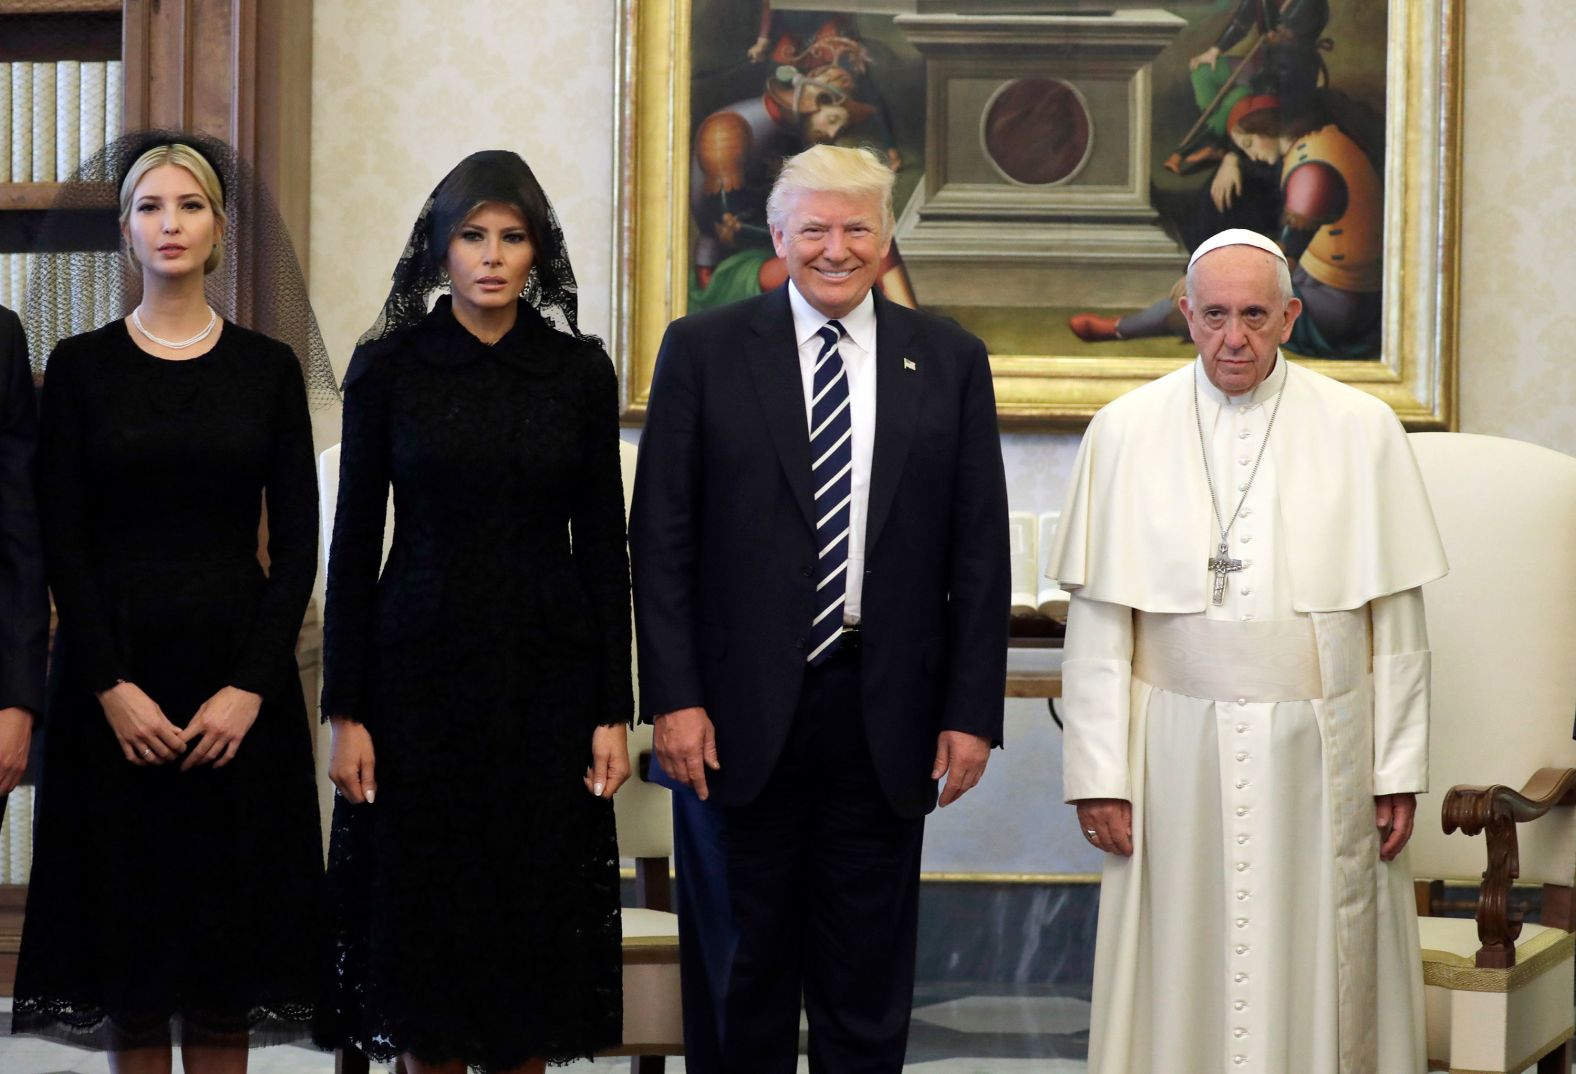 Pope Francis stands with Trump and his family during <a href="index.php?page=&url=http%3A%2F%2Fwww.cnn.com%2F2017%2F05%2F23%2Fpolitics%2Fpope-trump-meeting%2Findex.html" target="_blank">a private audience at the Vatican</a> in May 2017. Joining the president were his wife and his daughter Ivanka.